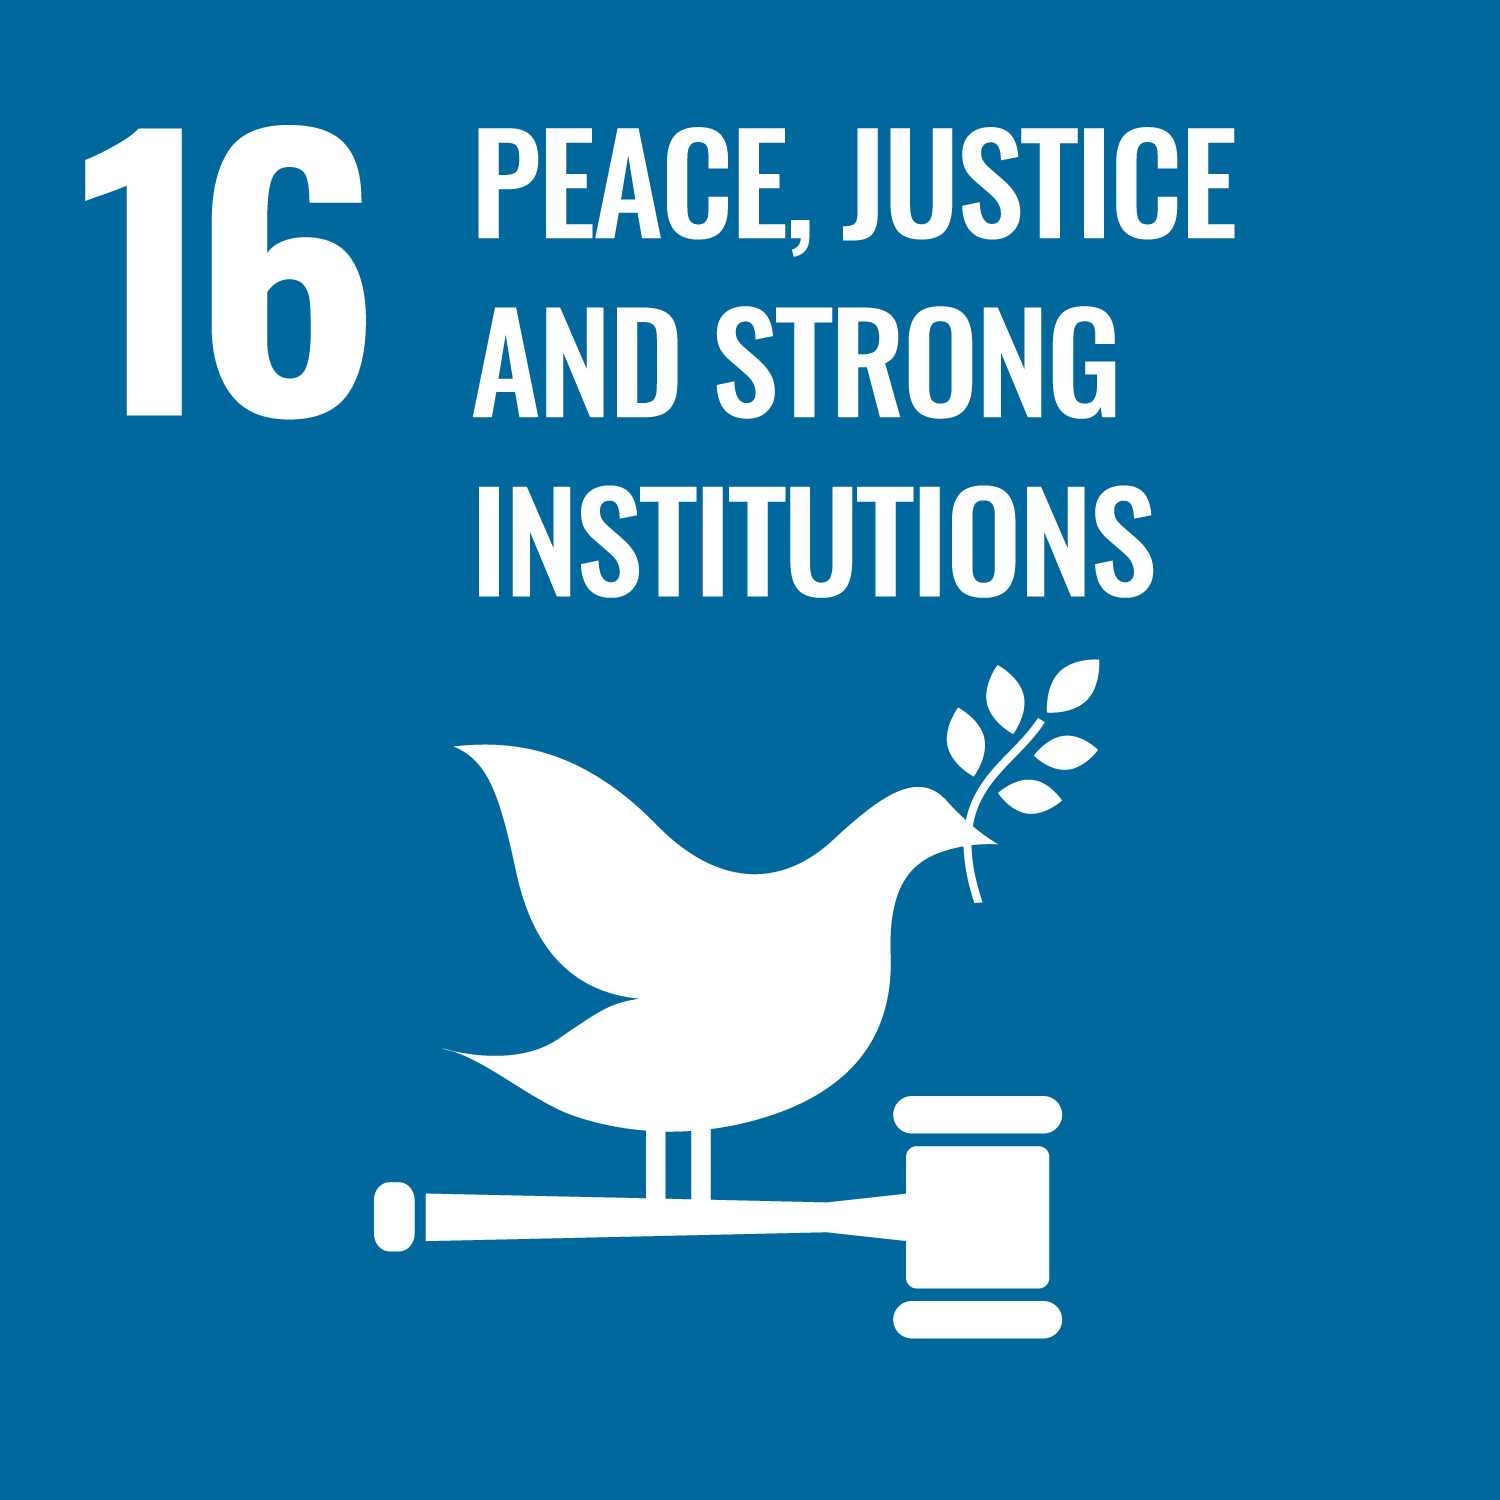 SDG 16. Peace, justice and strong institutions